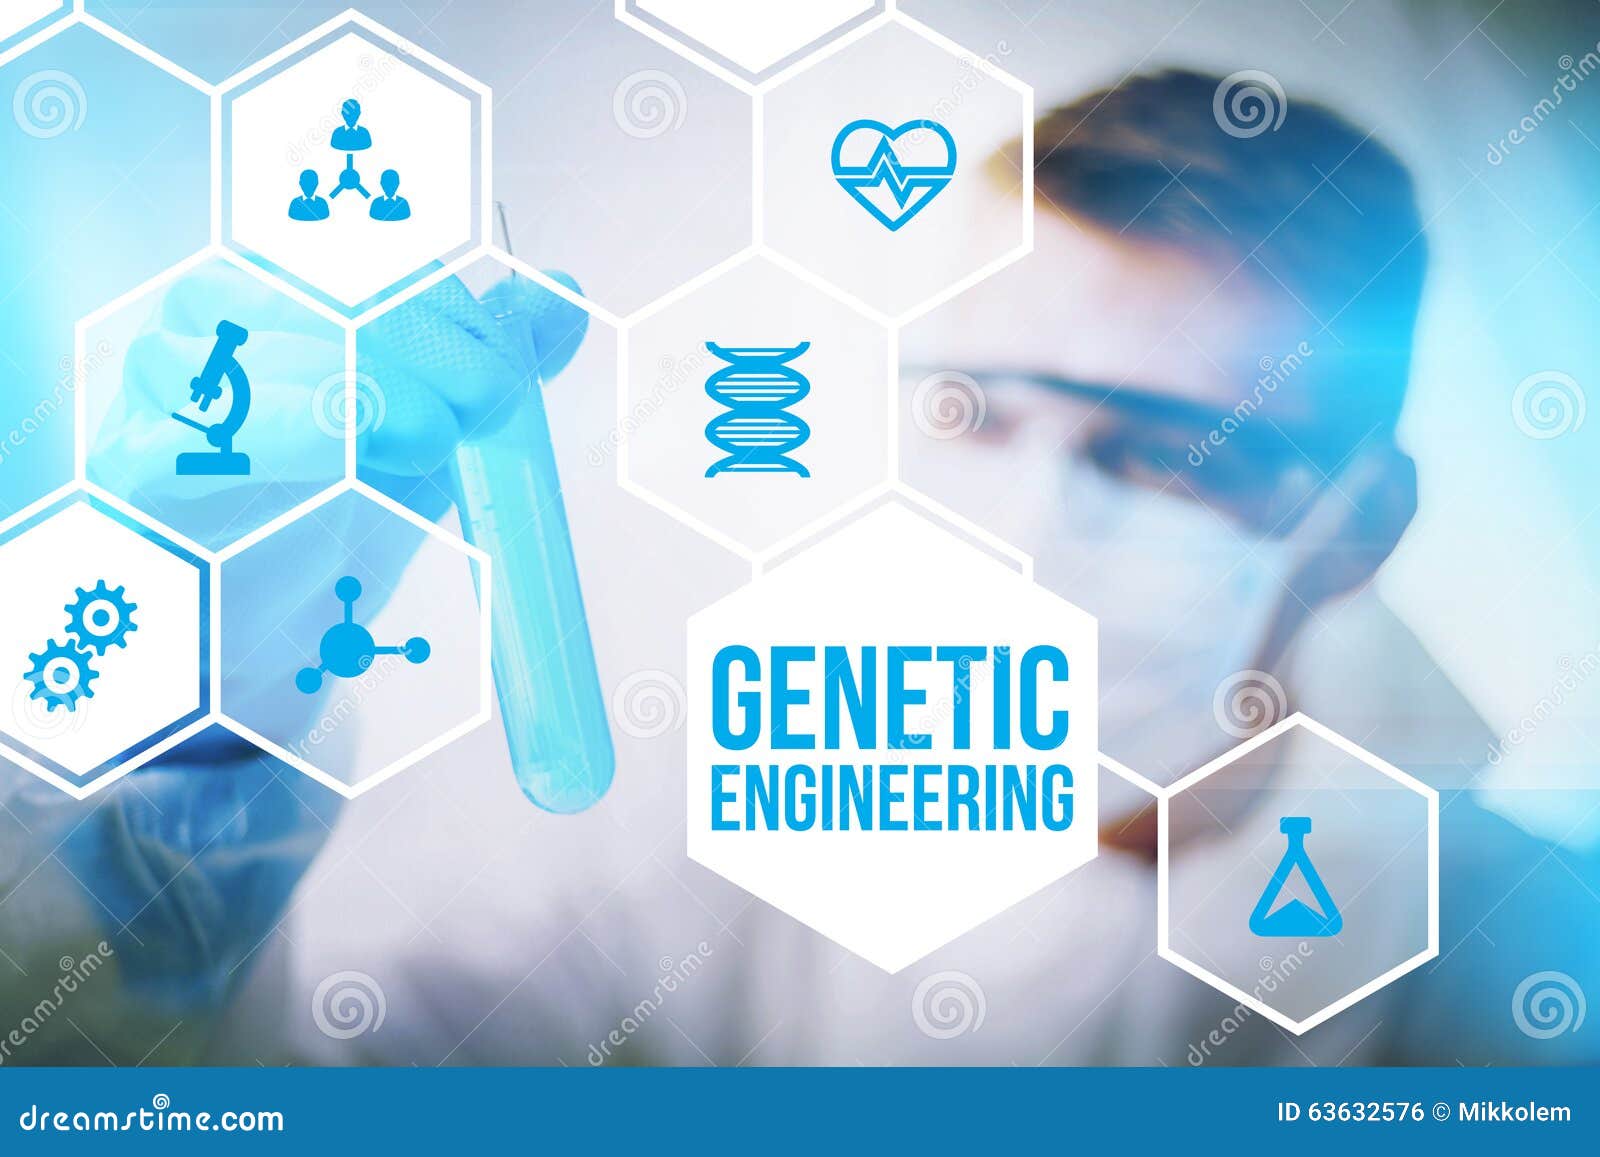 A study of science and genetic engineering